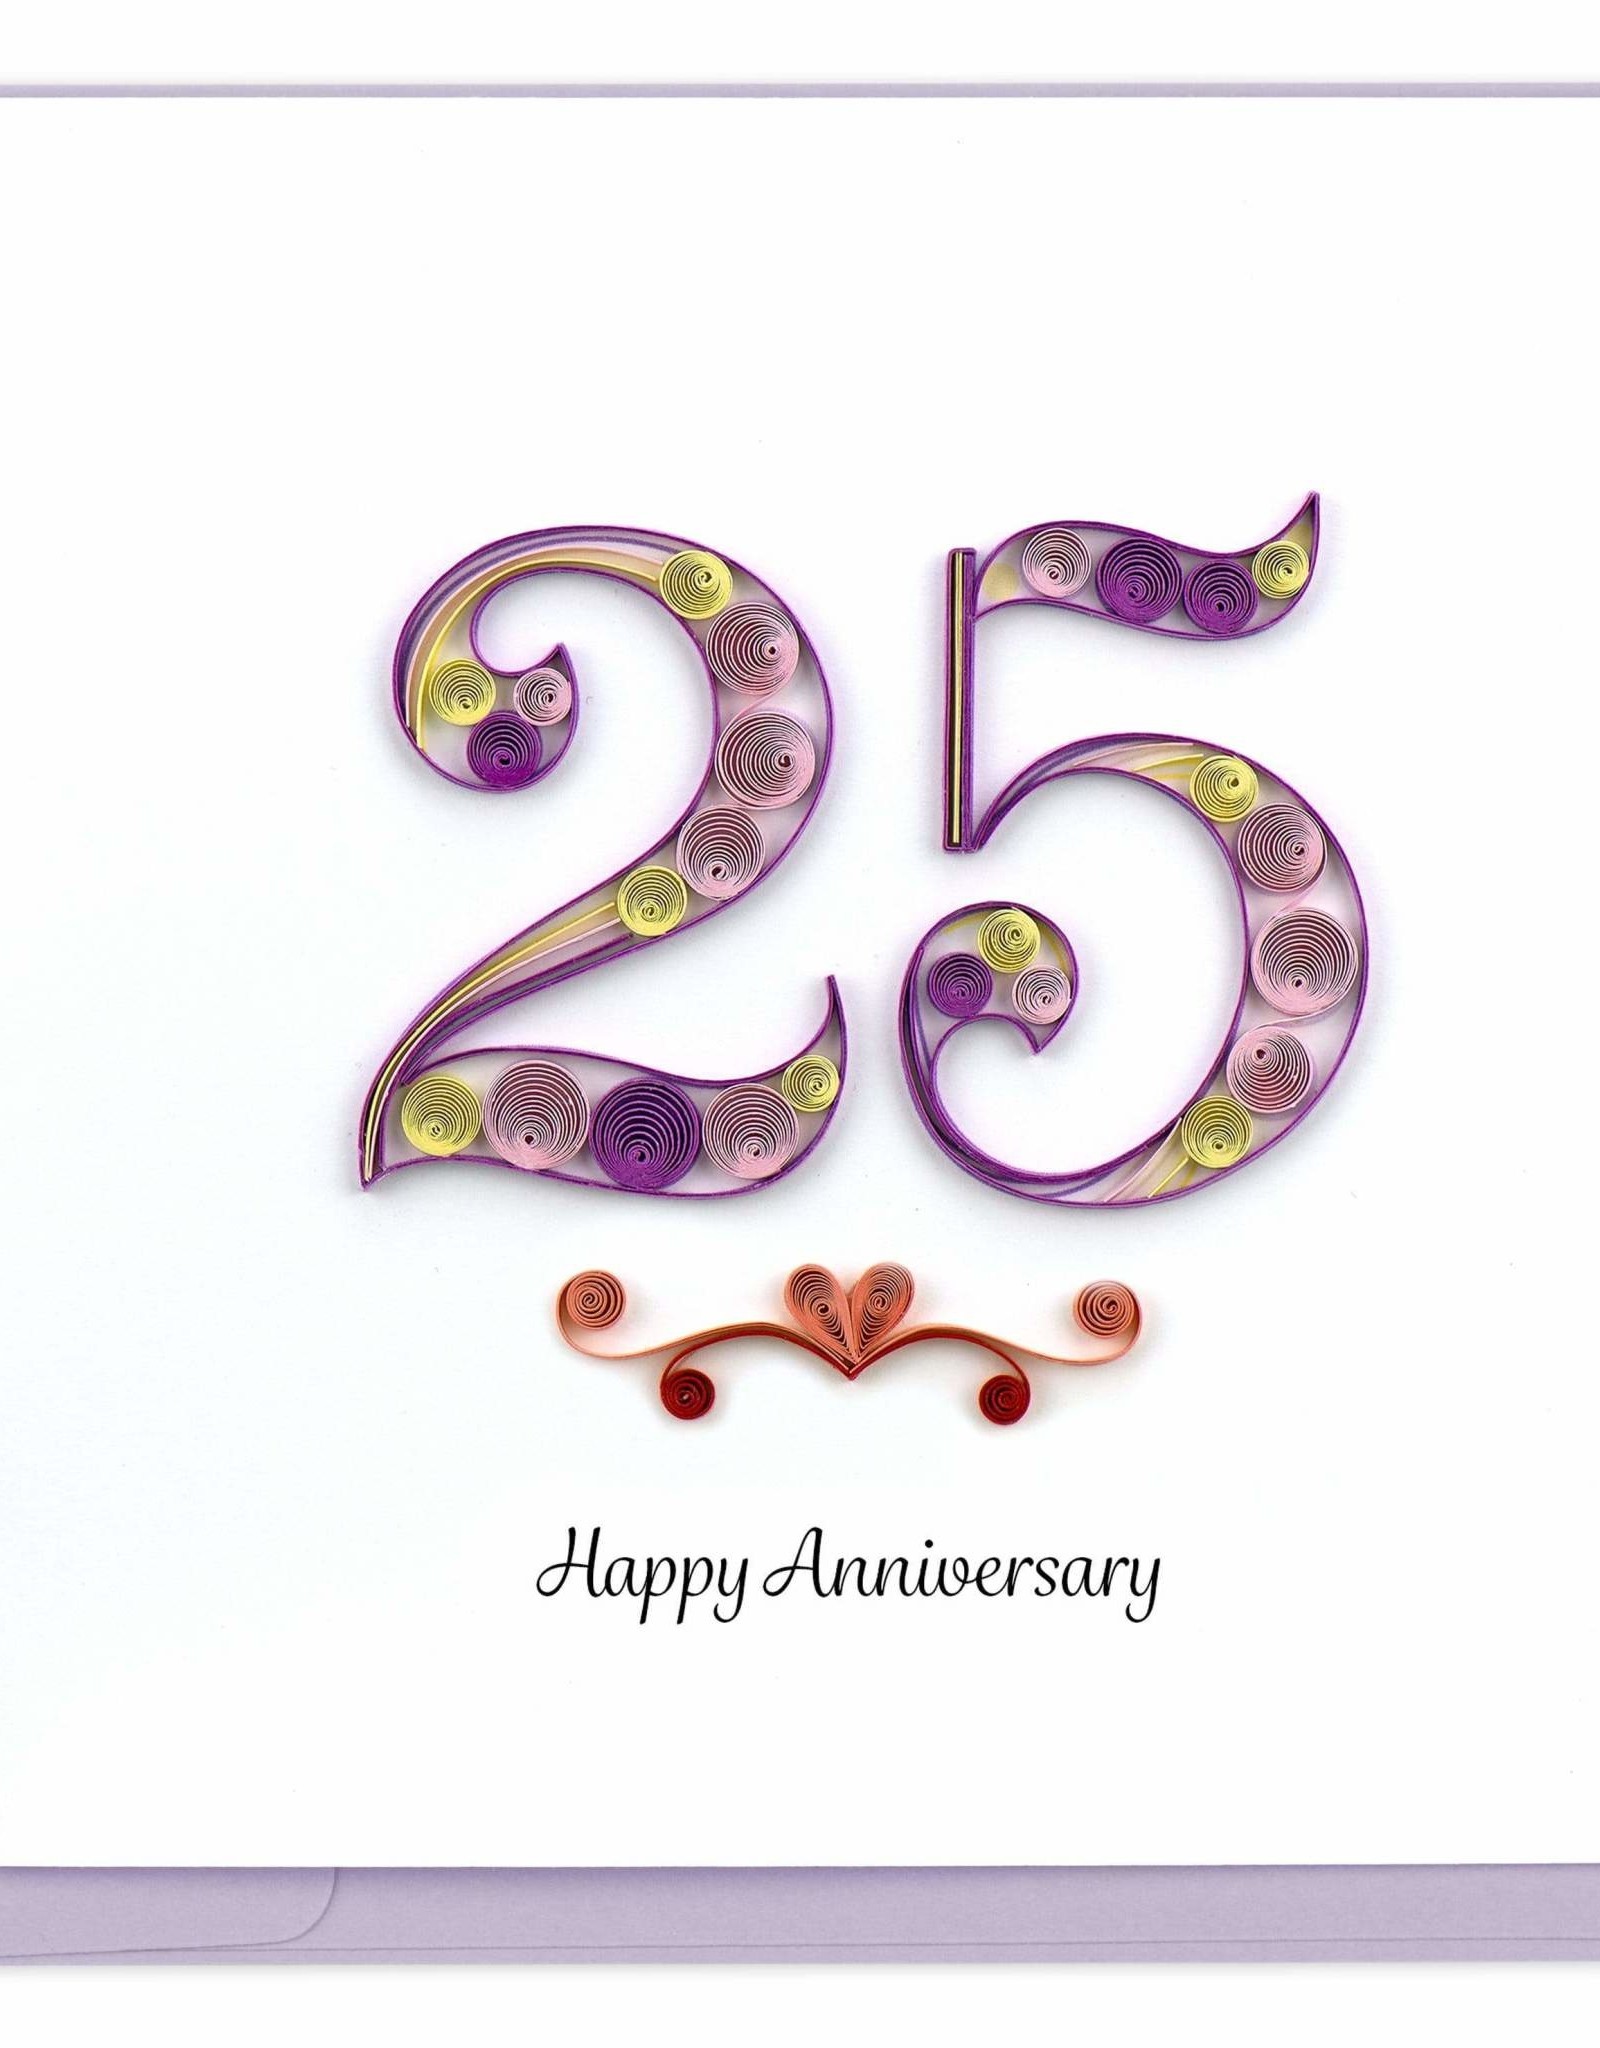 Quilling Card Quilled 25th Anniversary Card